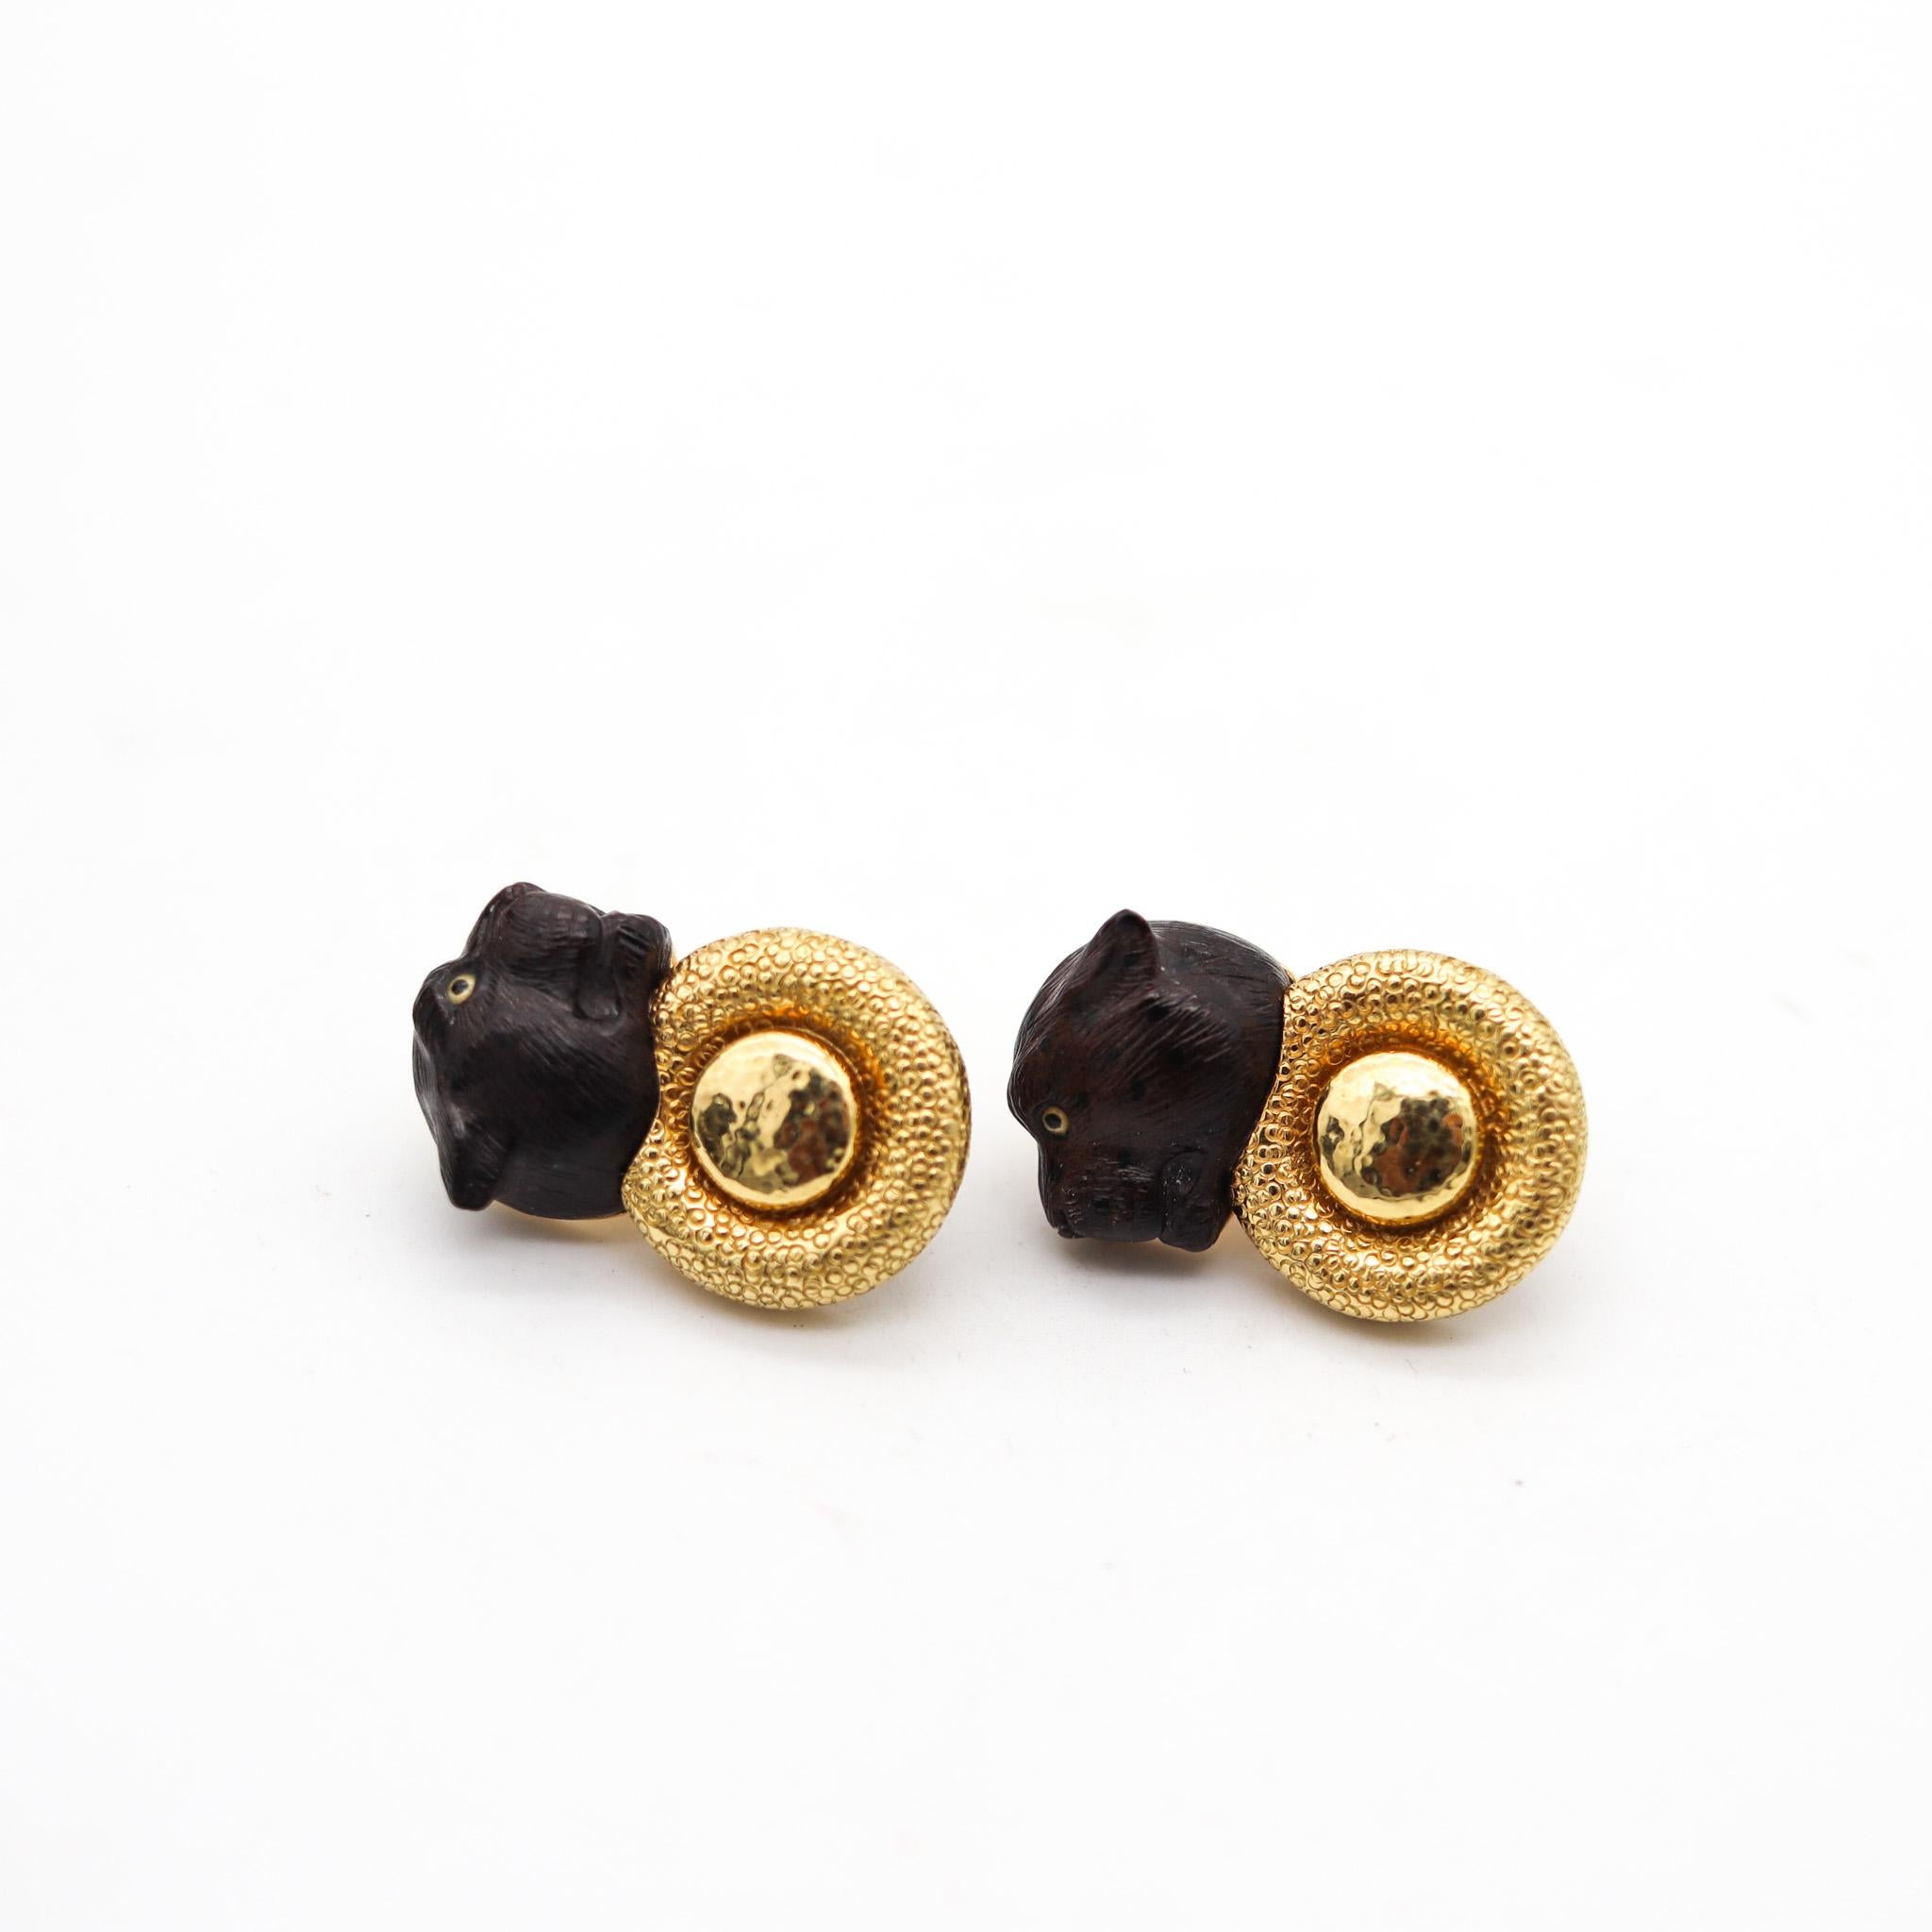 Pair of clips-earrings designed by Elizabeth Gage.

Gorgeous vintage pair of earrings, created by the British jewelry designer Elizabeth Gage, back in the 2005. These clip-on earrings was carefully crafted as a left and right, with Etruscan revival